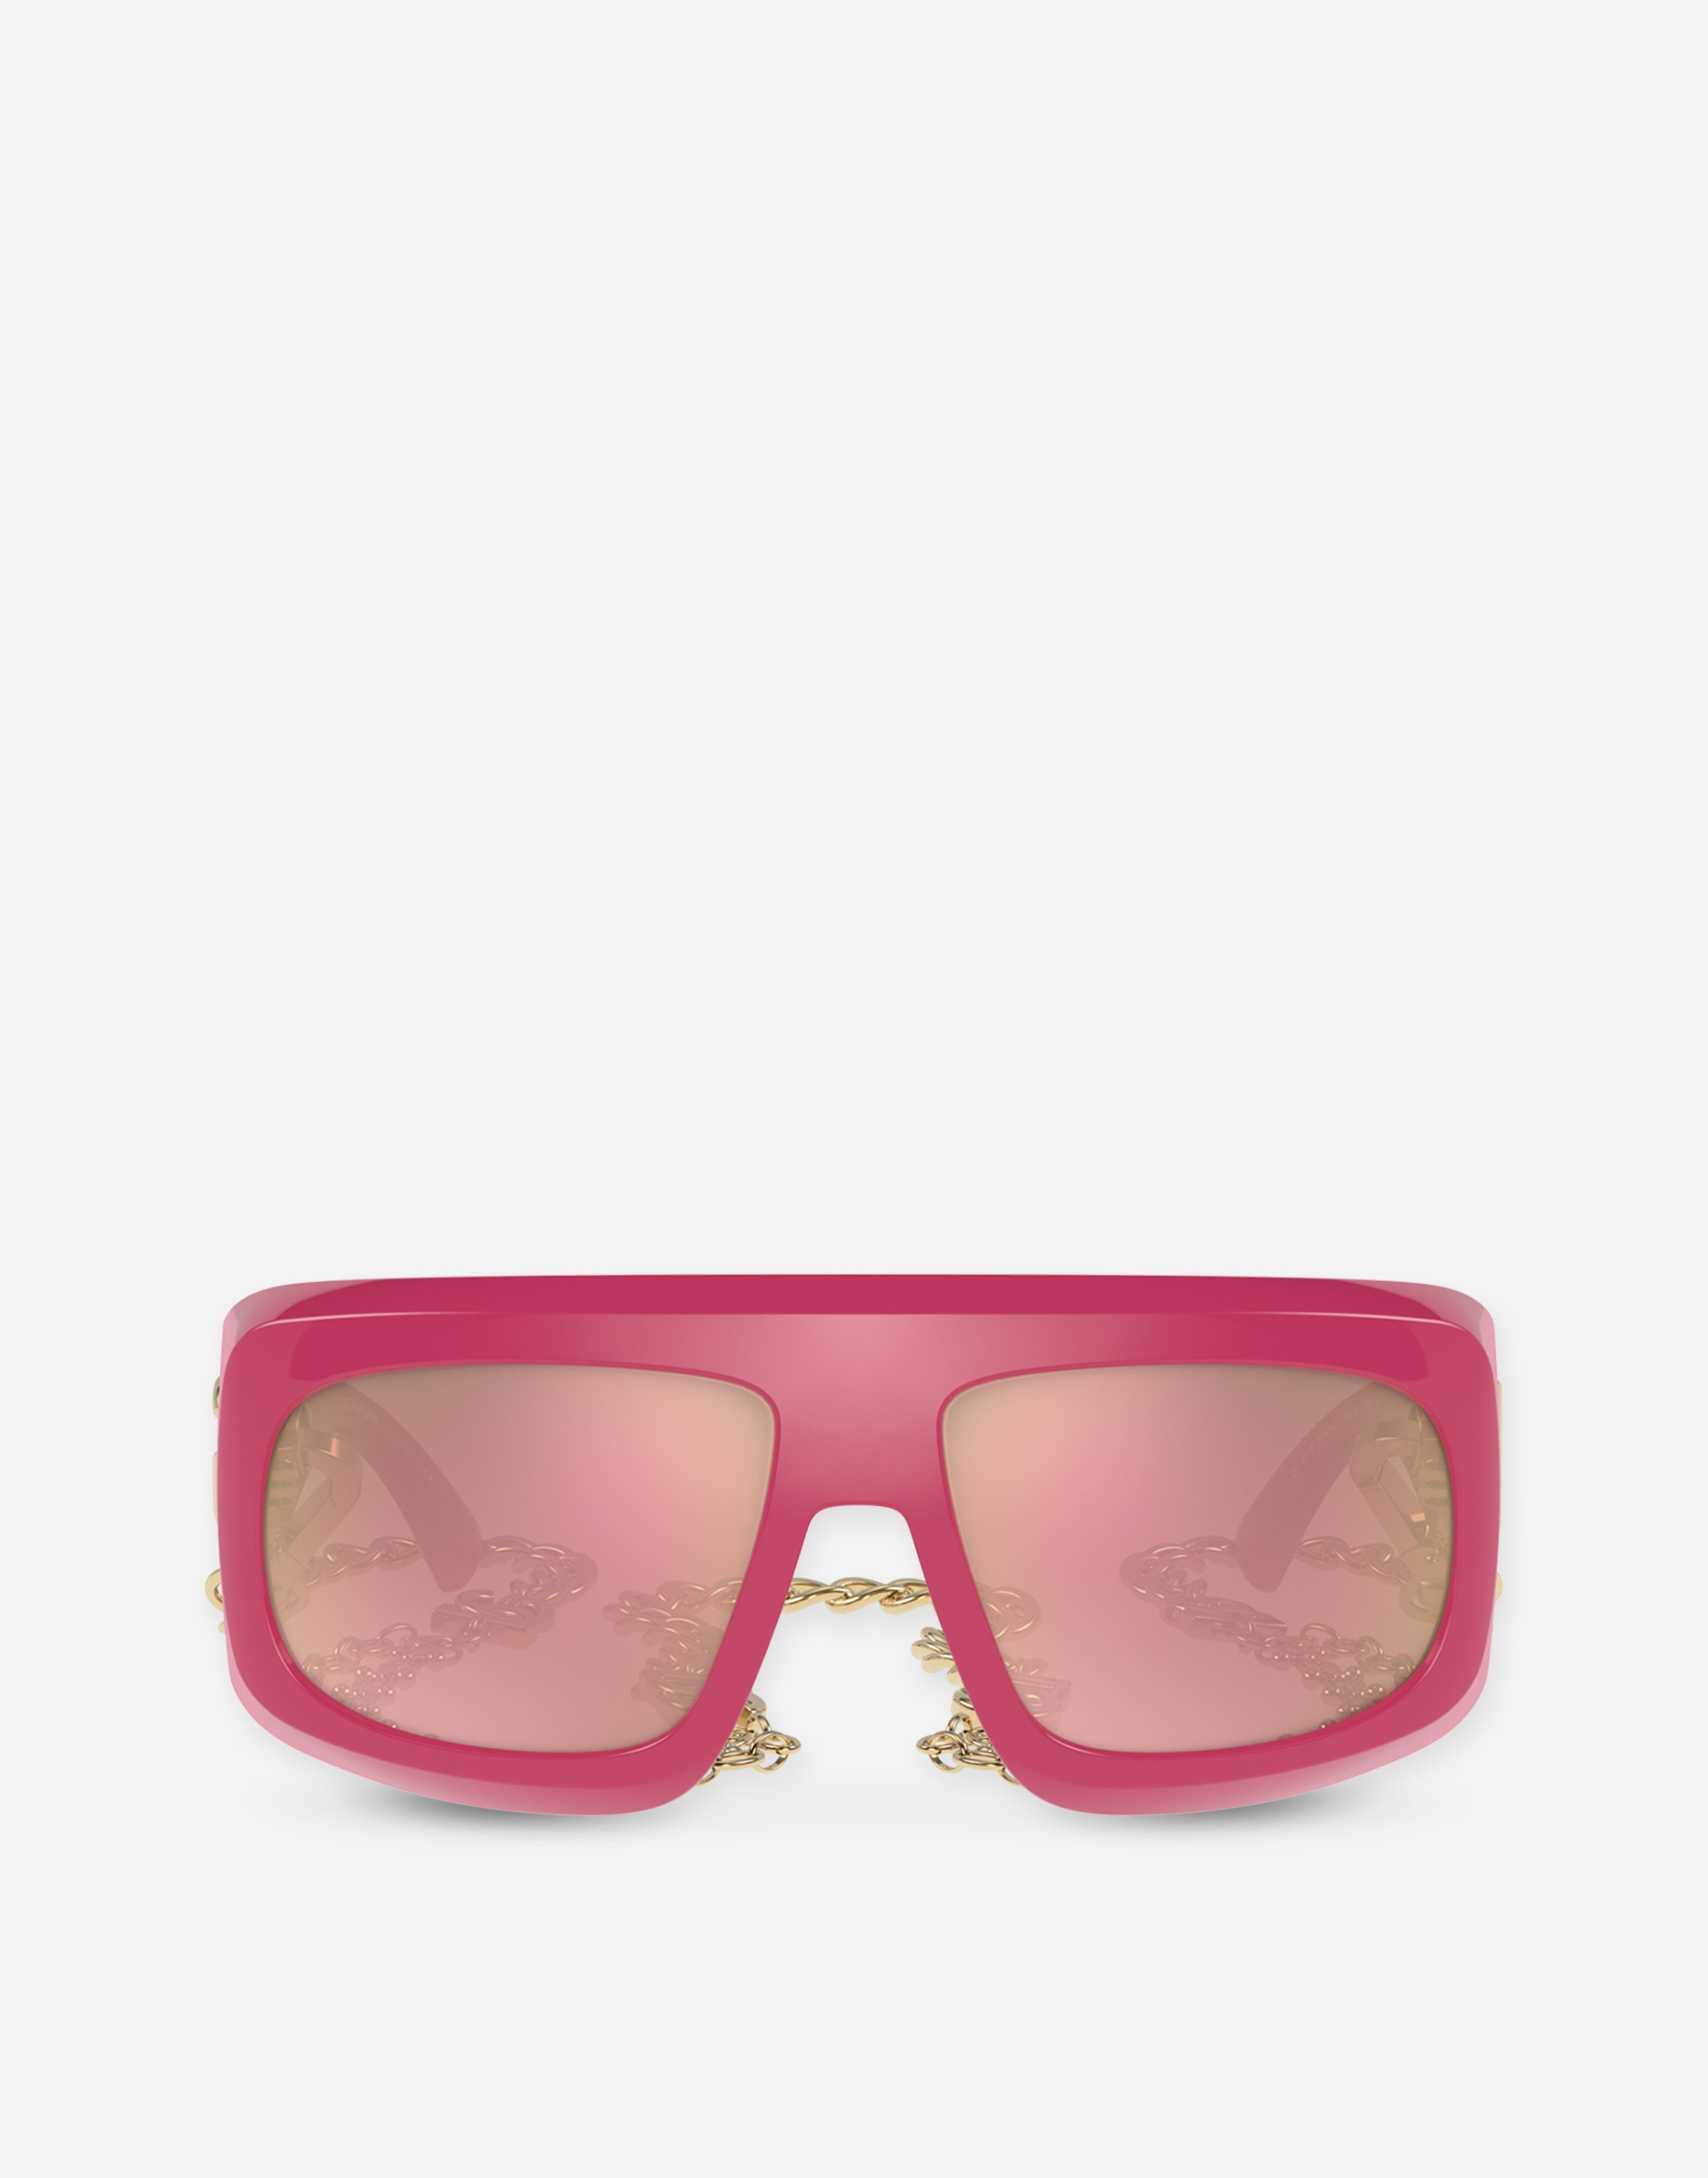 Joy Therapy sunglasses in Pink